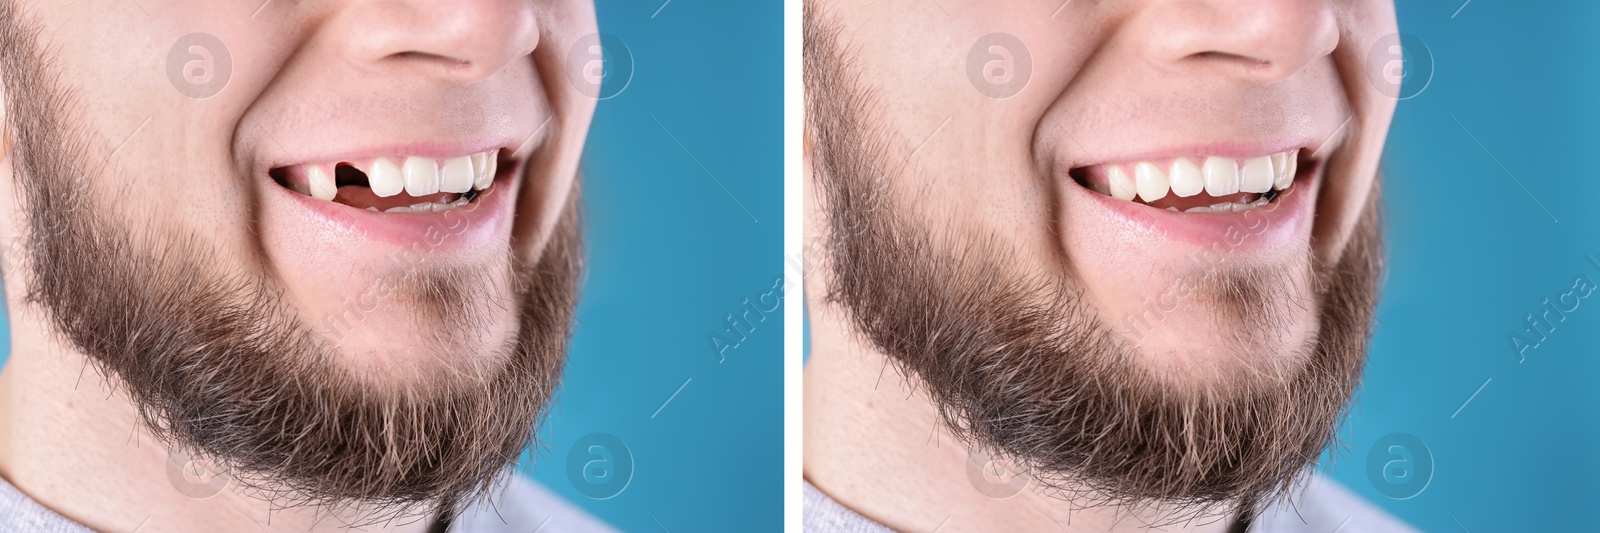 Image of Man showing teeth before and after dental implant surgery, closeup. Collage of photos on blue background